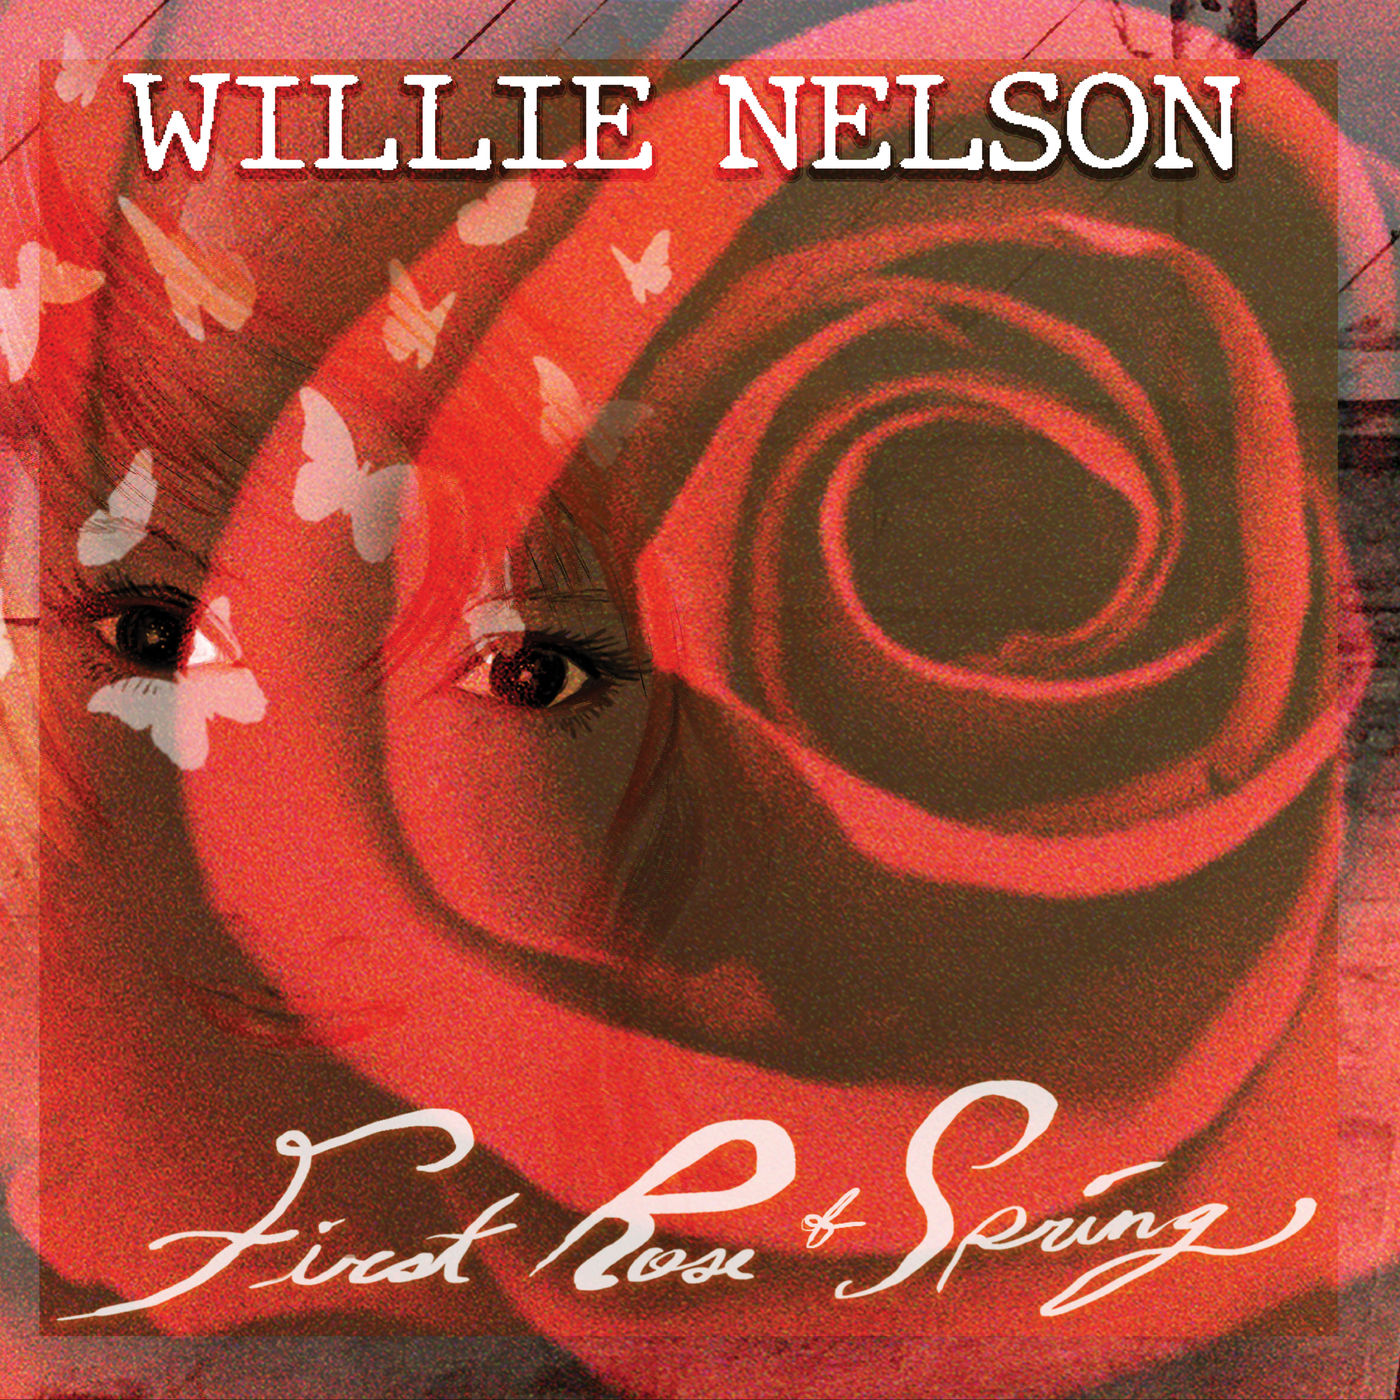 Willie Nelson - 2020 - First Rose Of Spring [2020] 24-96